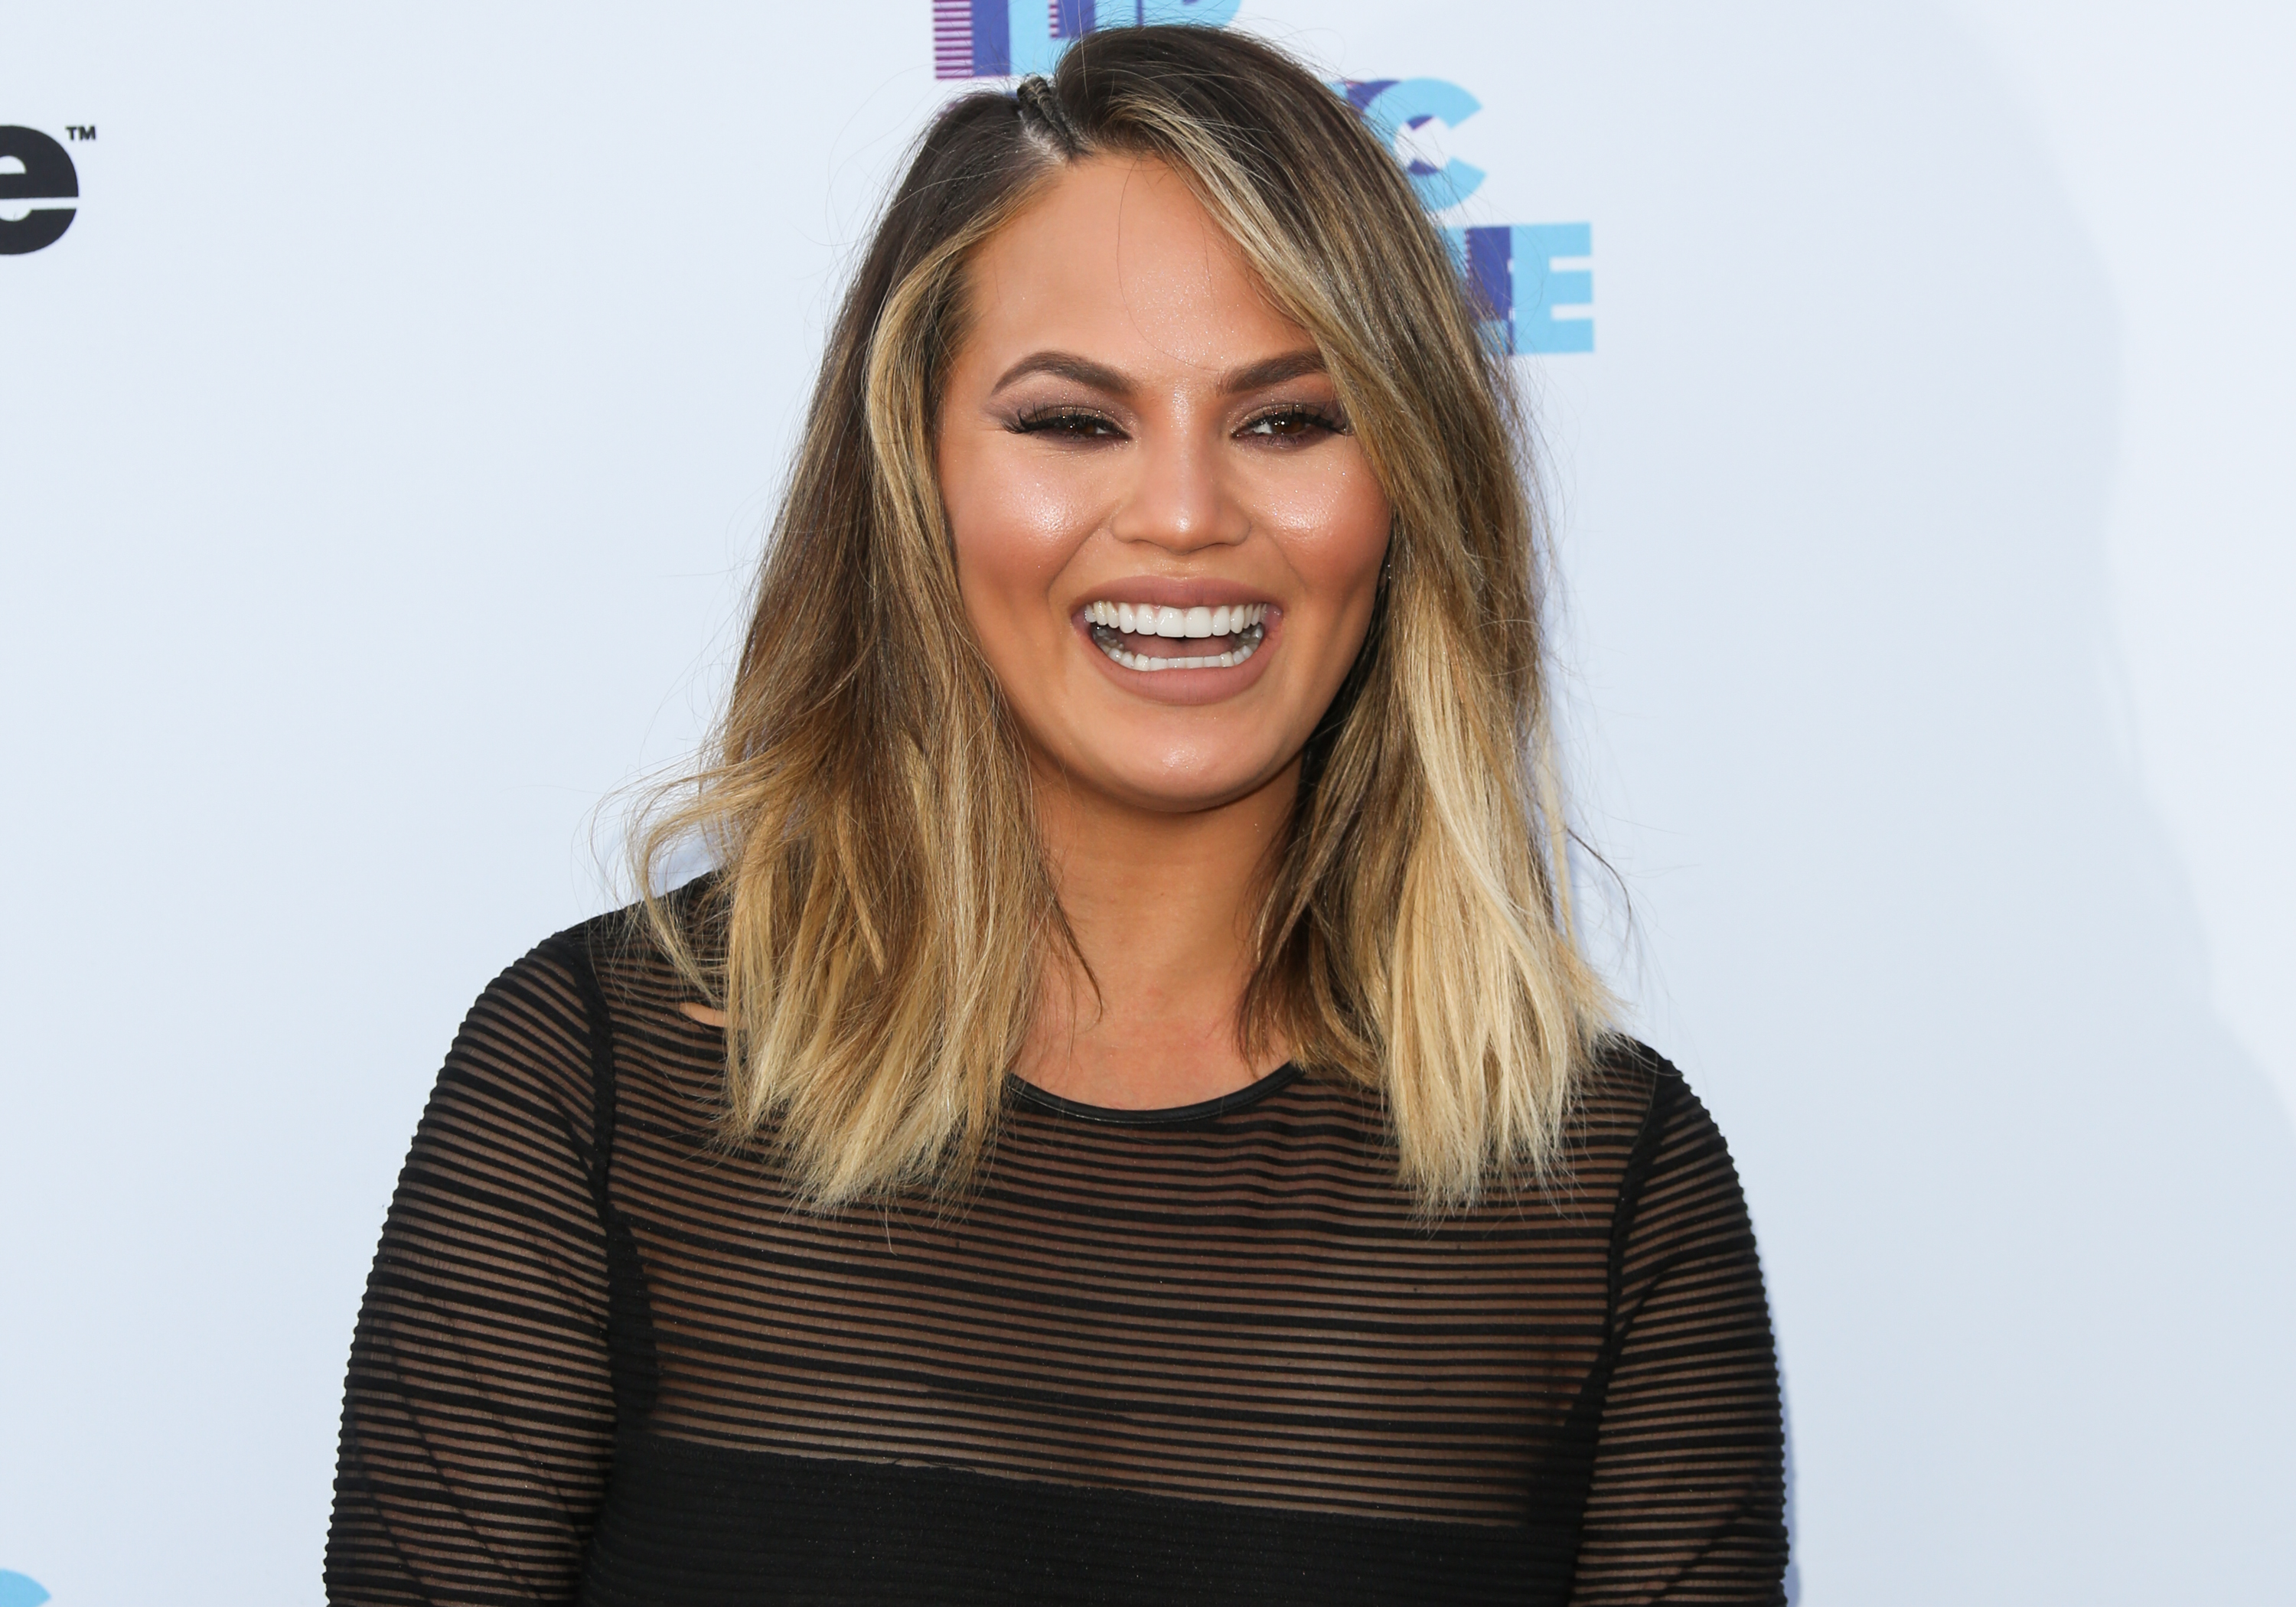 Fashion Model / TV Personality Chrissy Teigen attends the screening of Spike's "Lip Sync Battle" in North Hollywood, Calif. on June 14, 2016. (Paul Archuleta—FilmMagic/Getty Images)